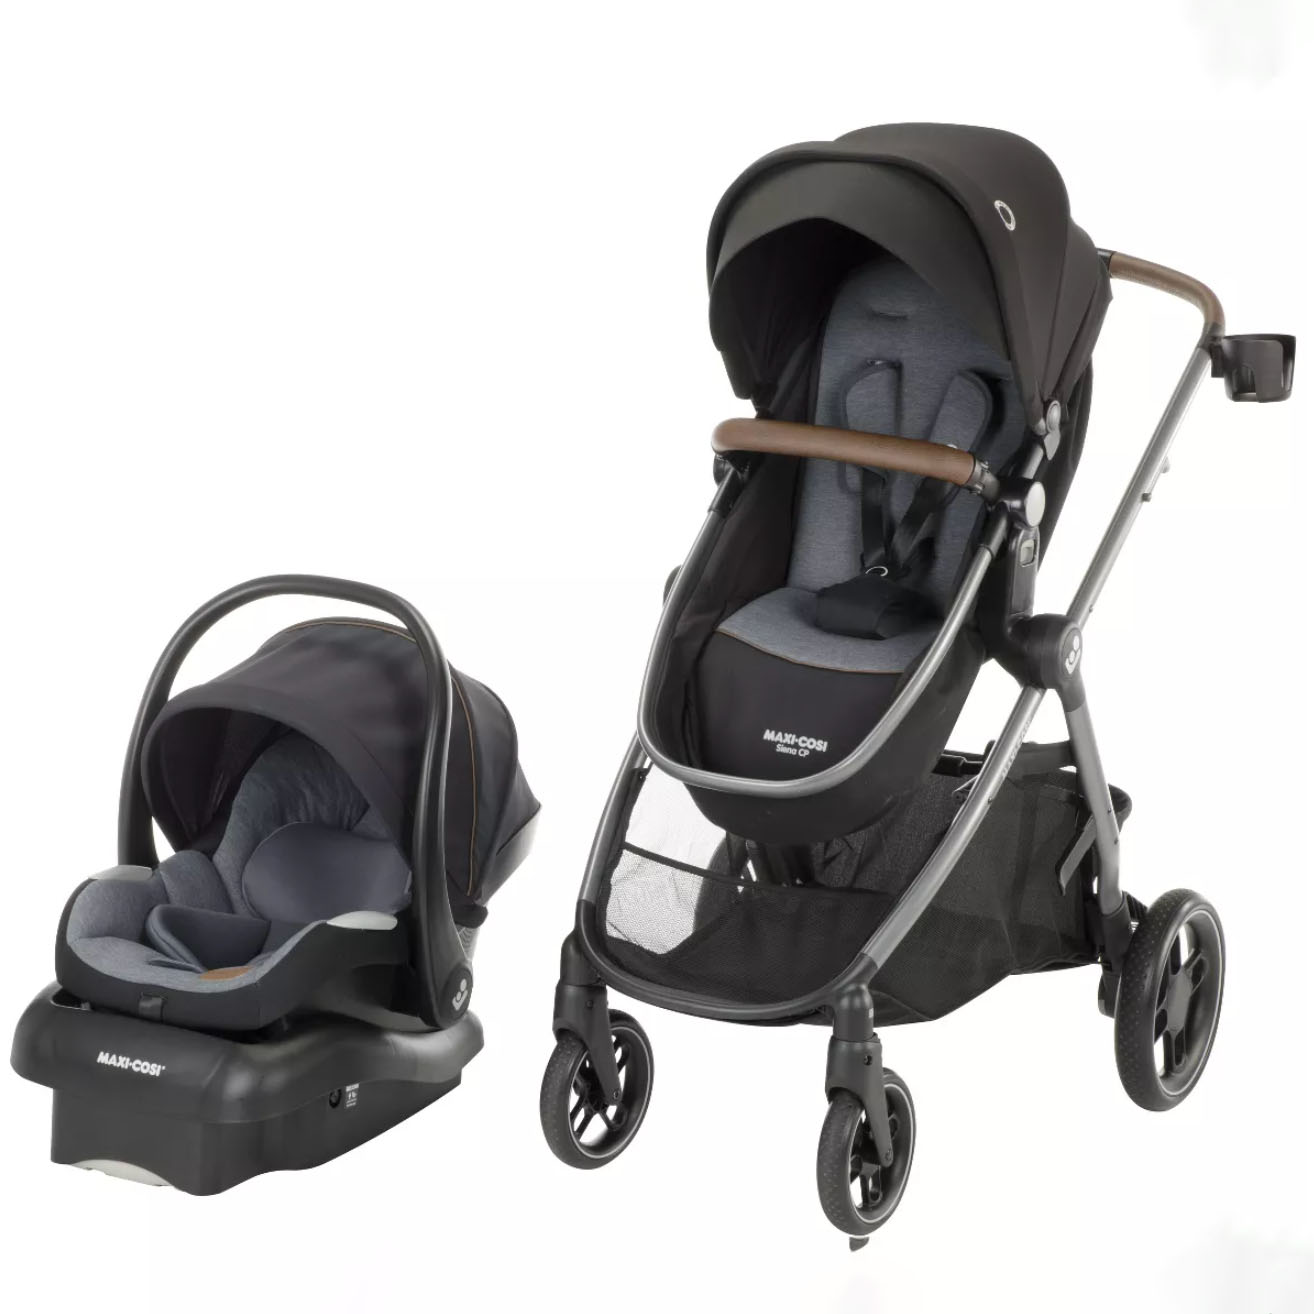 Black stroller and baby car seat